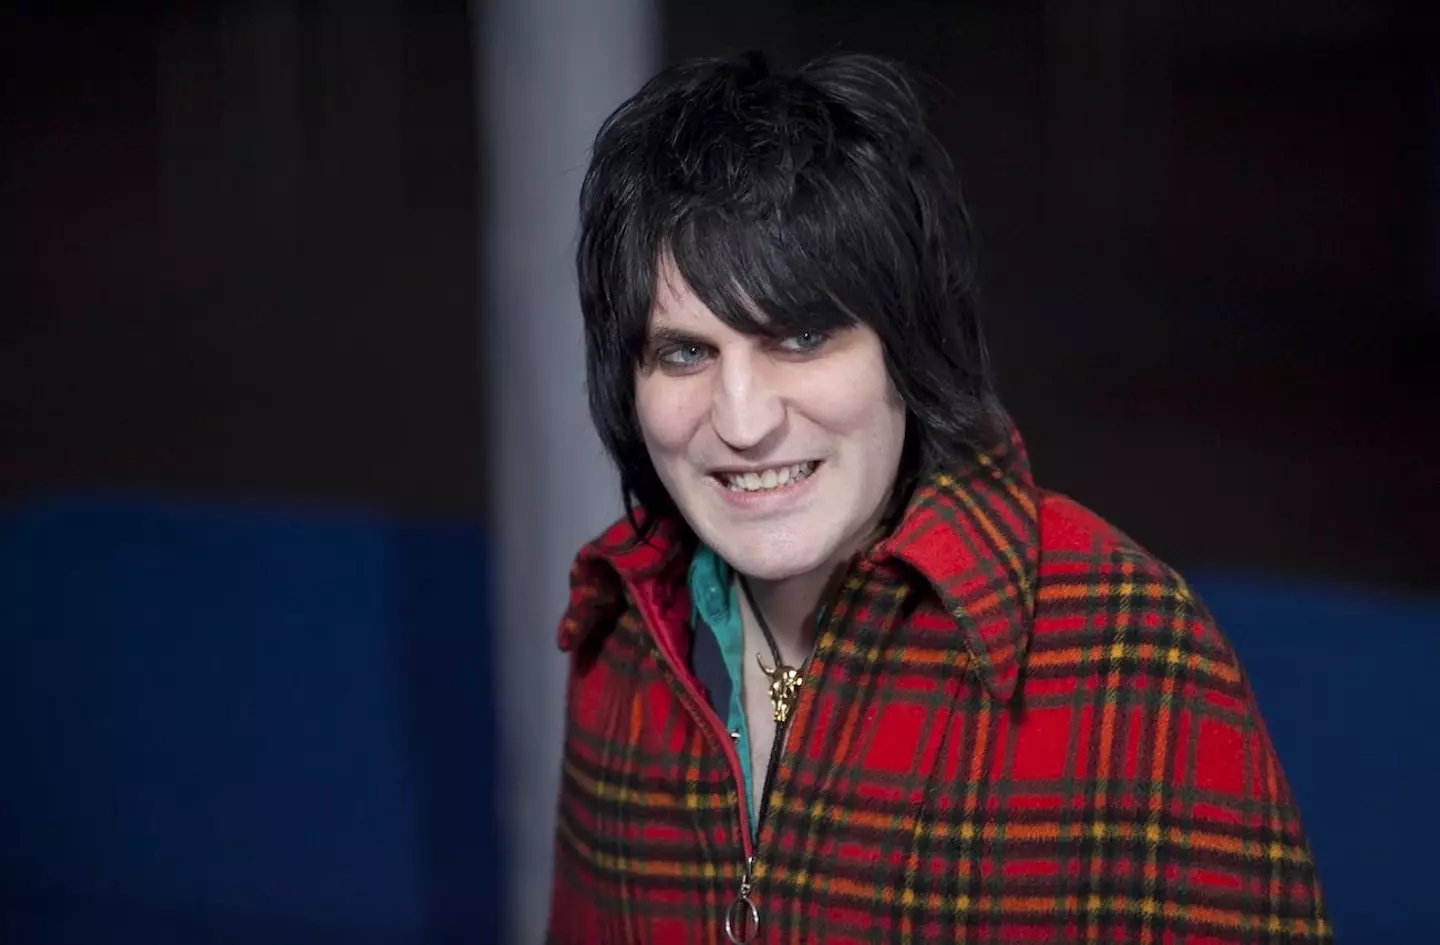 Could Noel Fielding be the witch?